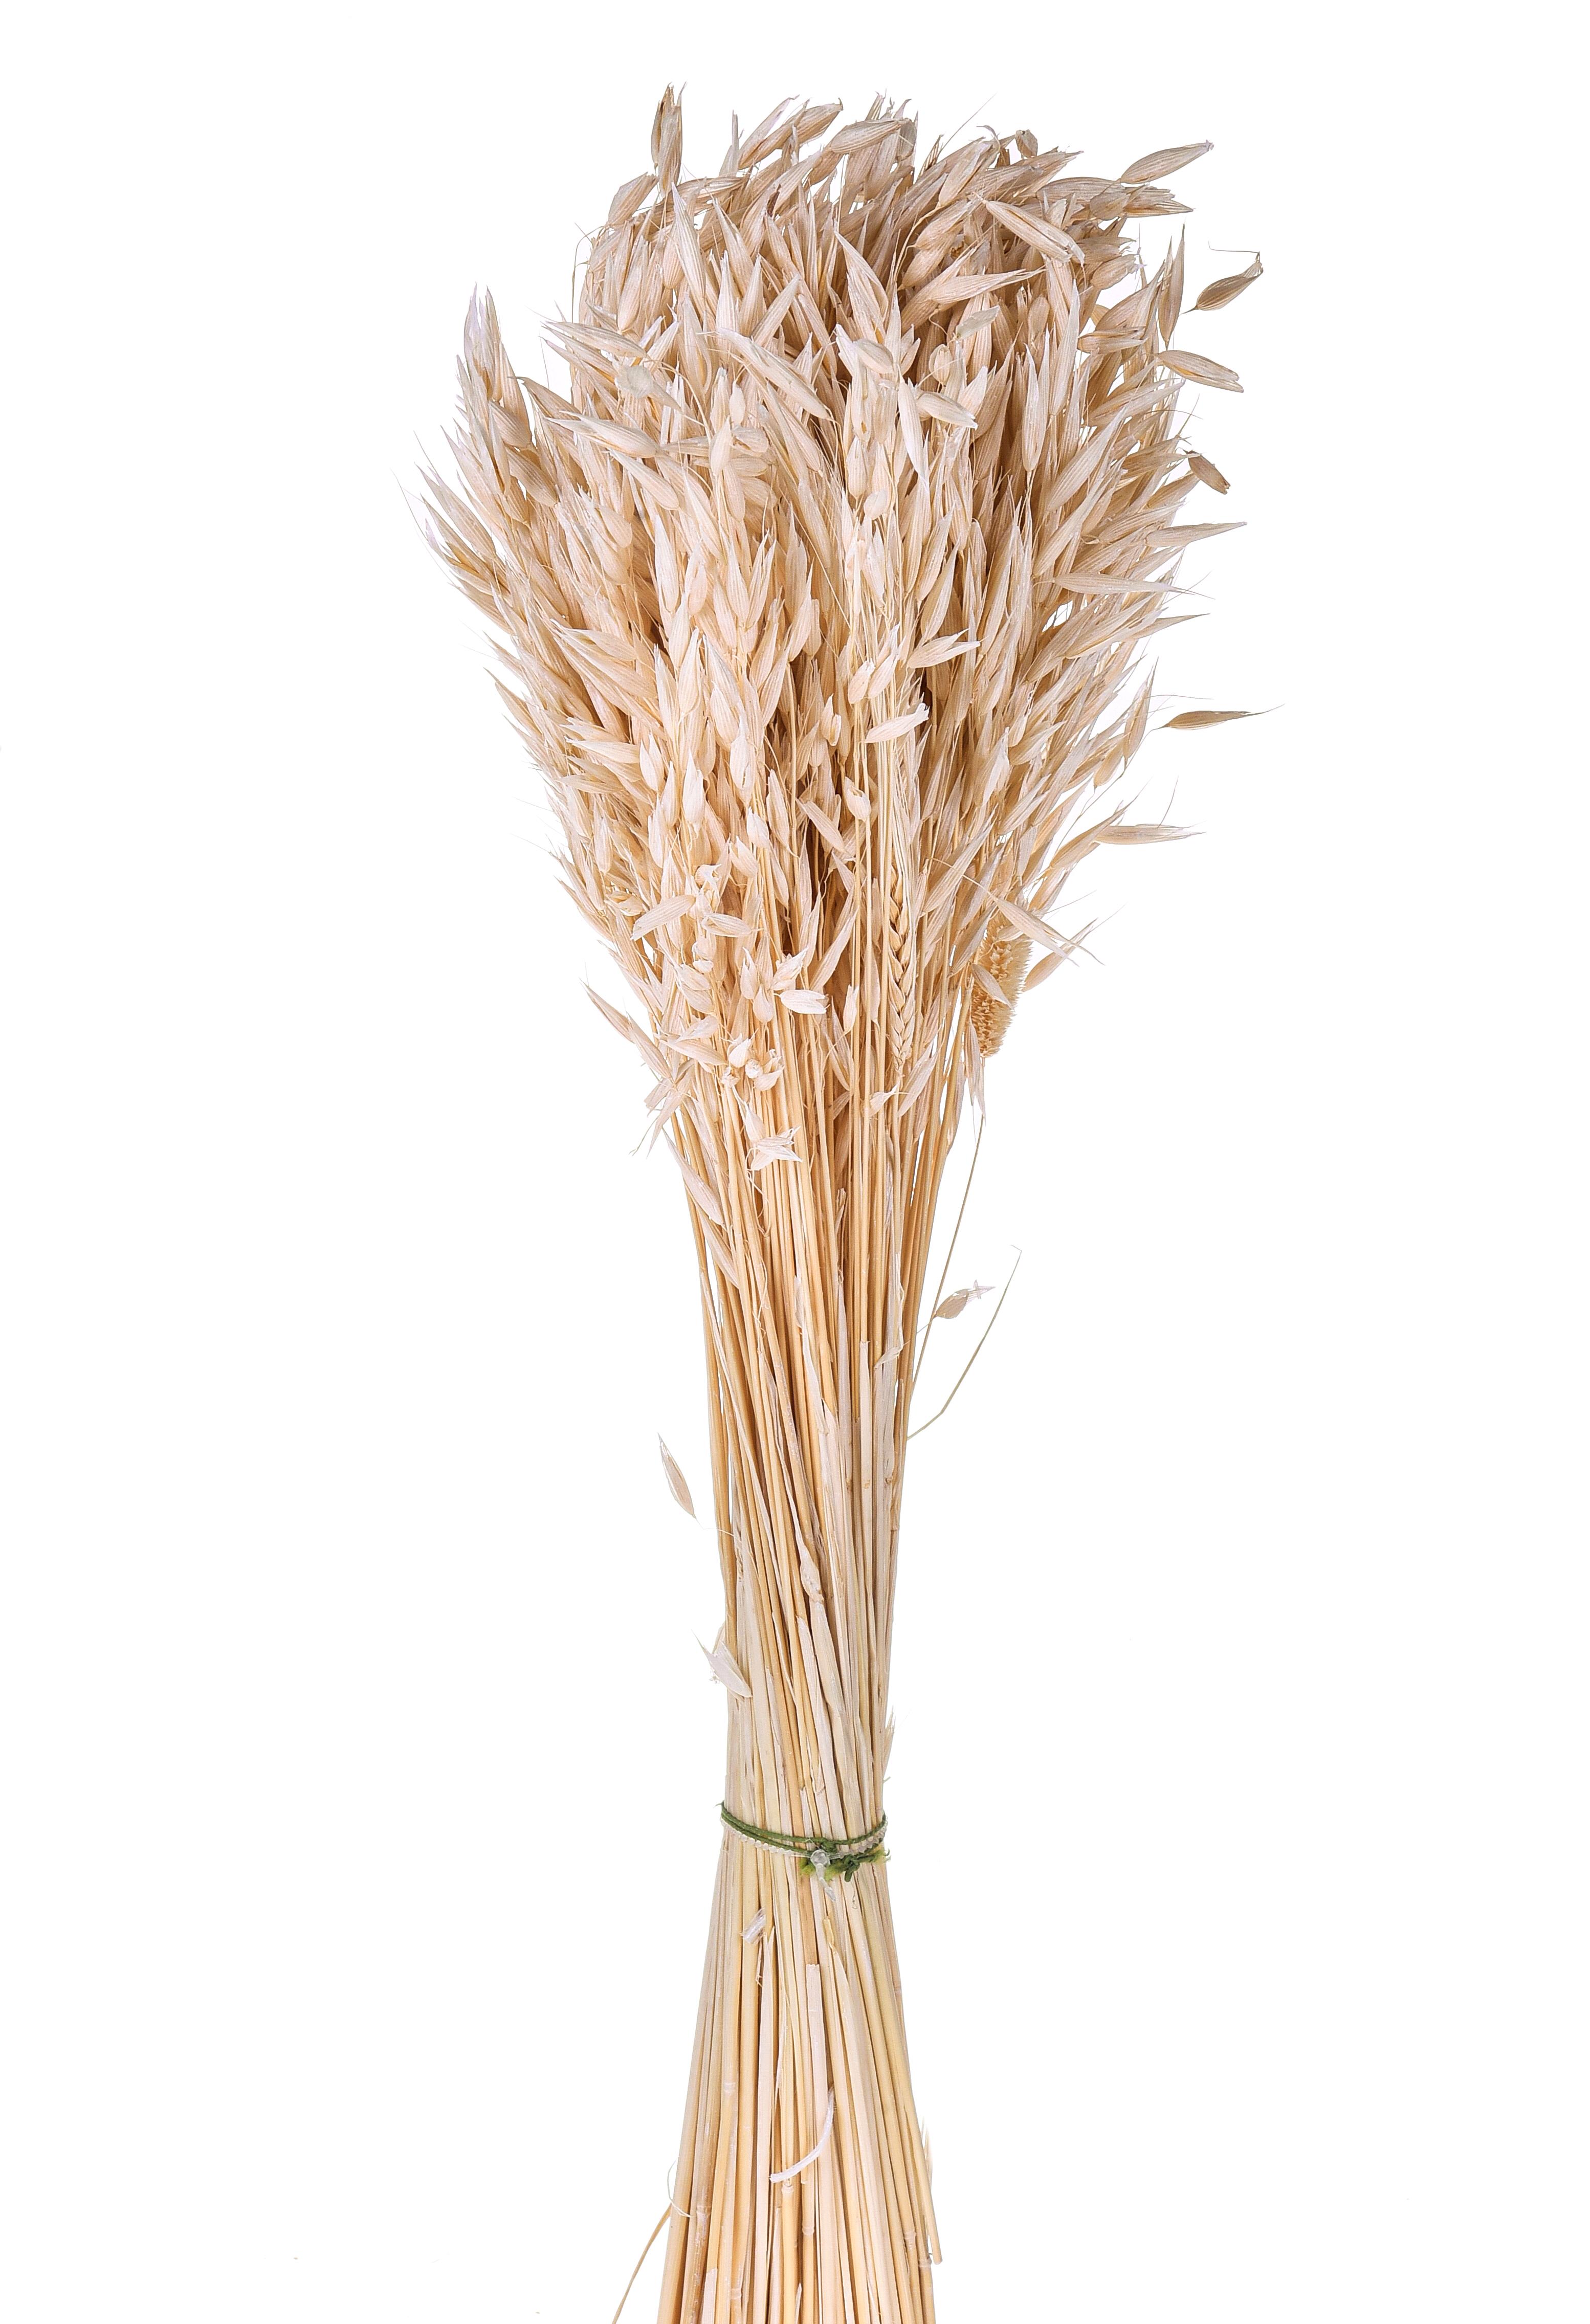 NATURAL PRODUCTS DRIED FLOWERS AND ERBS, COLORED GRASS AND FLOWERS, AVENA SATIVA COLTIVATA SBIANCATA MAZZO